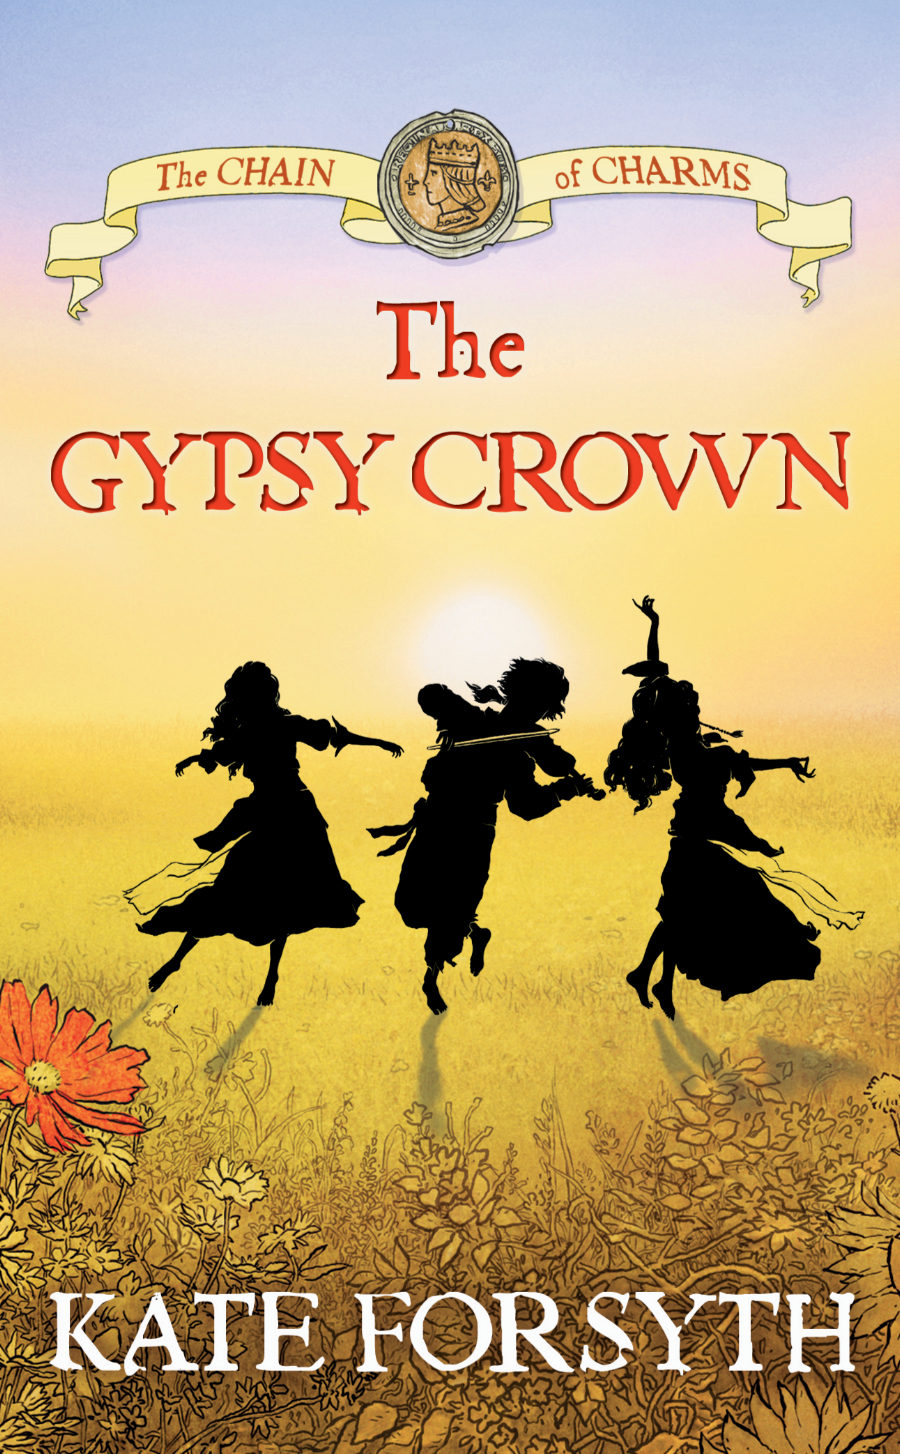 The Gypsy Crown (2006) by Kate Forsyth